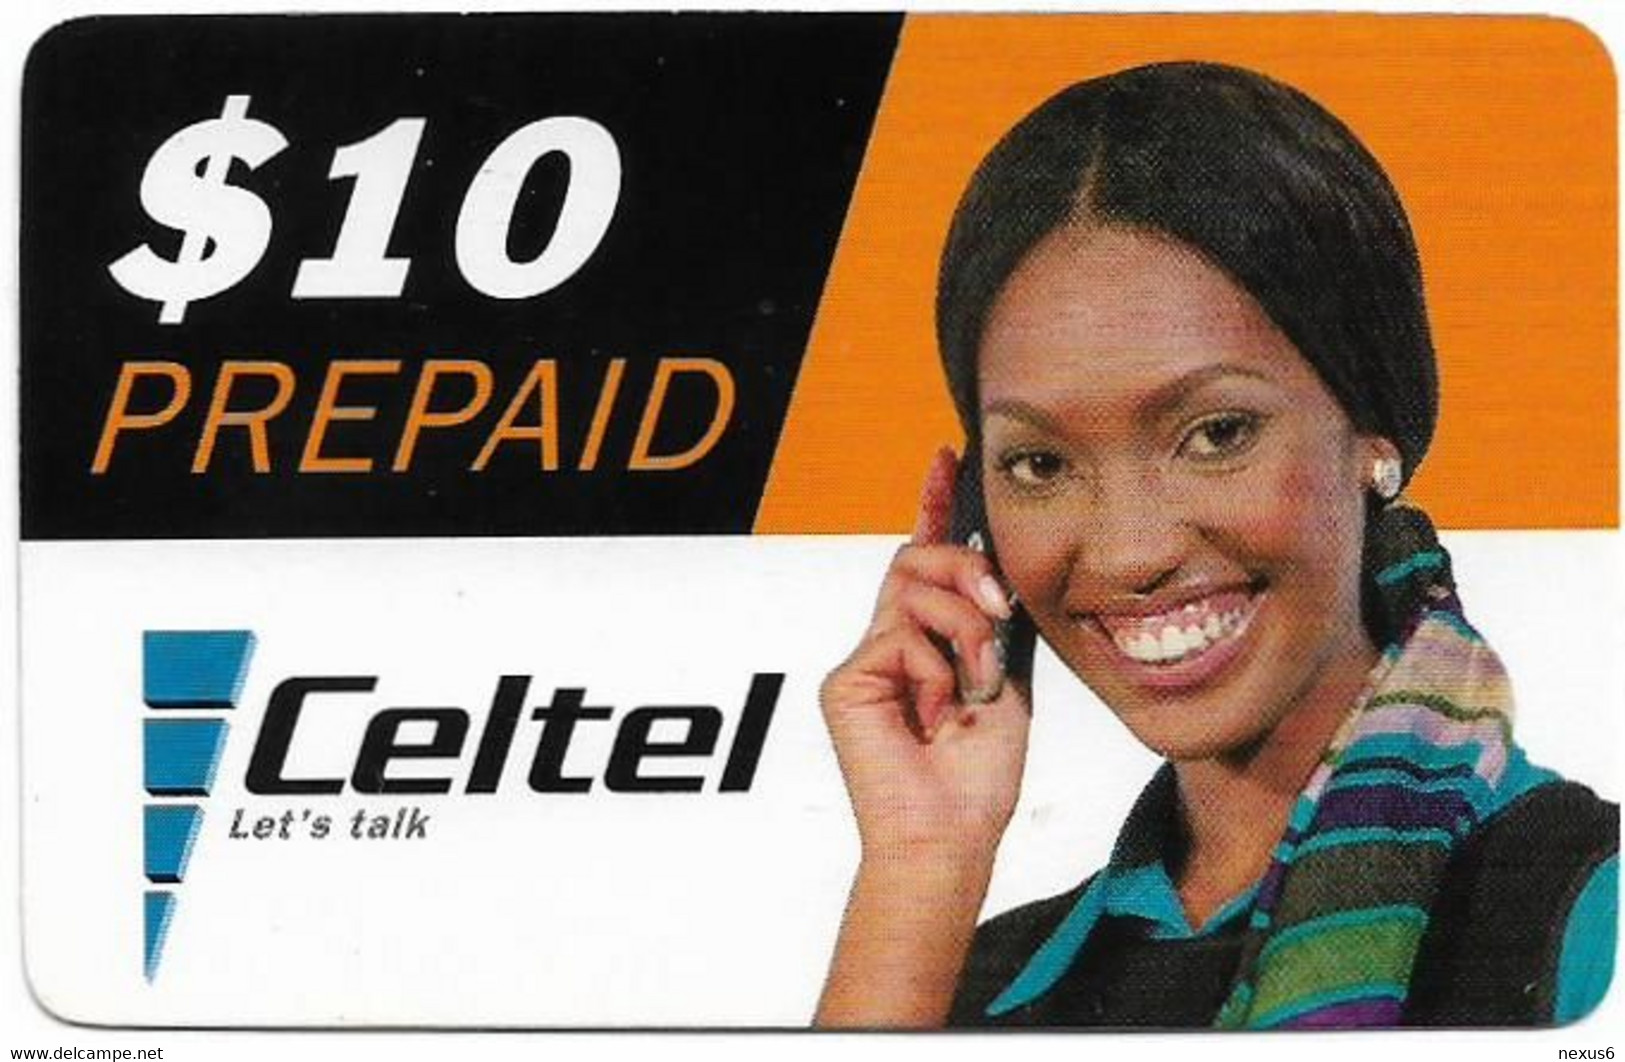 Zambia - Celtel - Lady With Scarf (Reverse 1), GSM Refill 10$, Used - Sambia